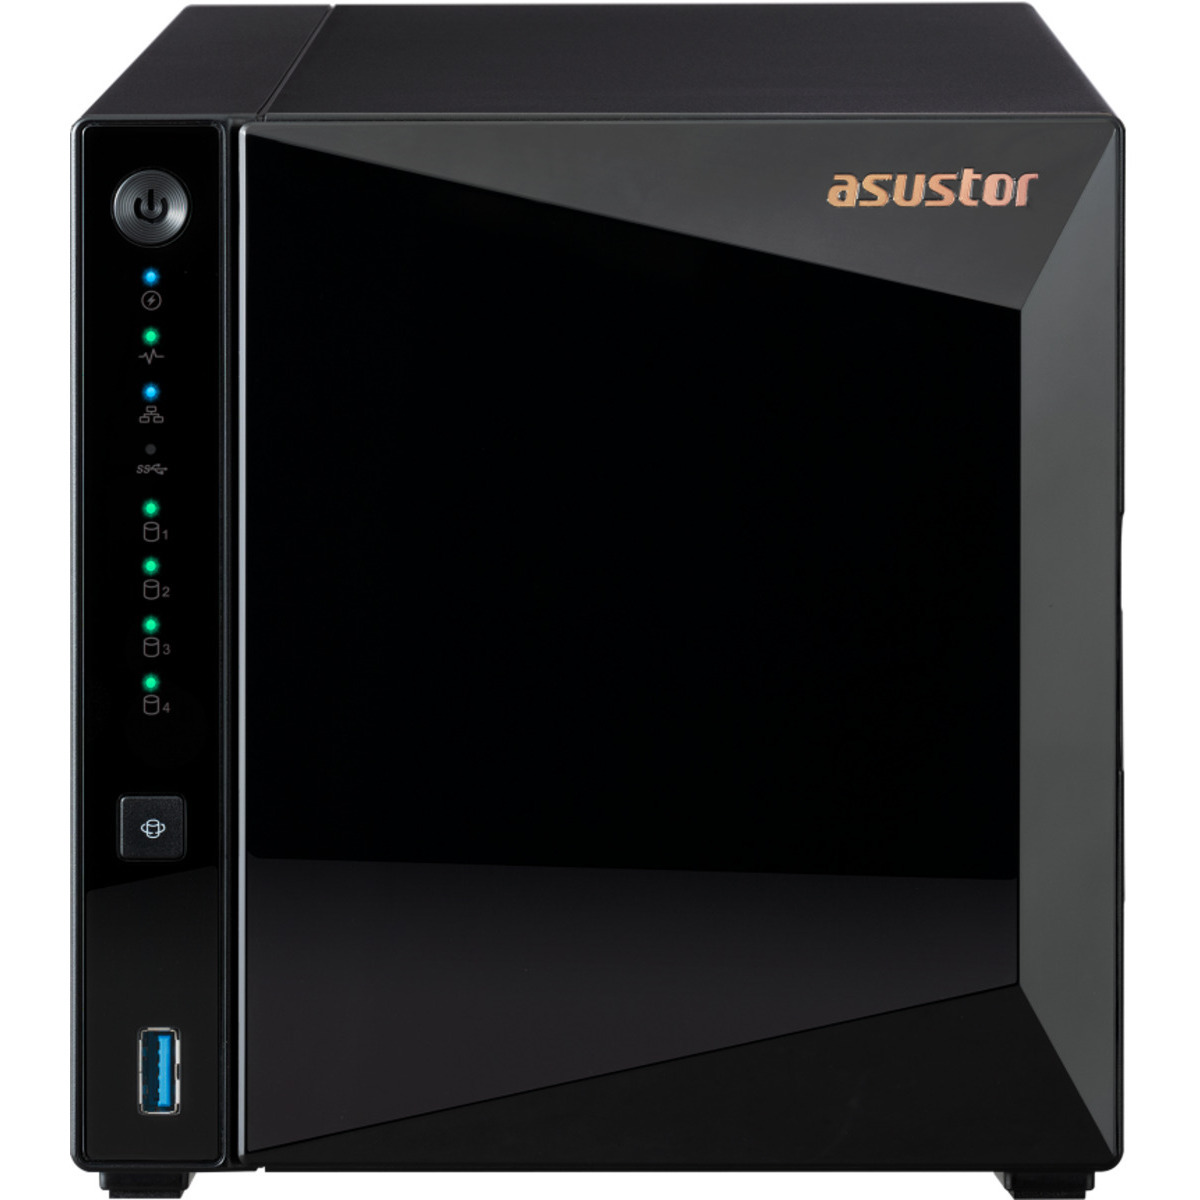 ASUSTOR DRIVESTOR 4 Pro AS3304T 48tb 4-Bay Desktop Personal / Basic Home / Small Office NAS - Network Attached Storage Device 3x16tb Seagate IronWolf Pro ST16000NT001 3.5 7200rpm SATA 6Gb/s HDD NAS Class Drives Installed - Burn-In Tested - ON SALE DRIVESTOR 4 Pro AS3304T